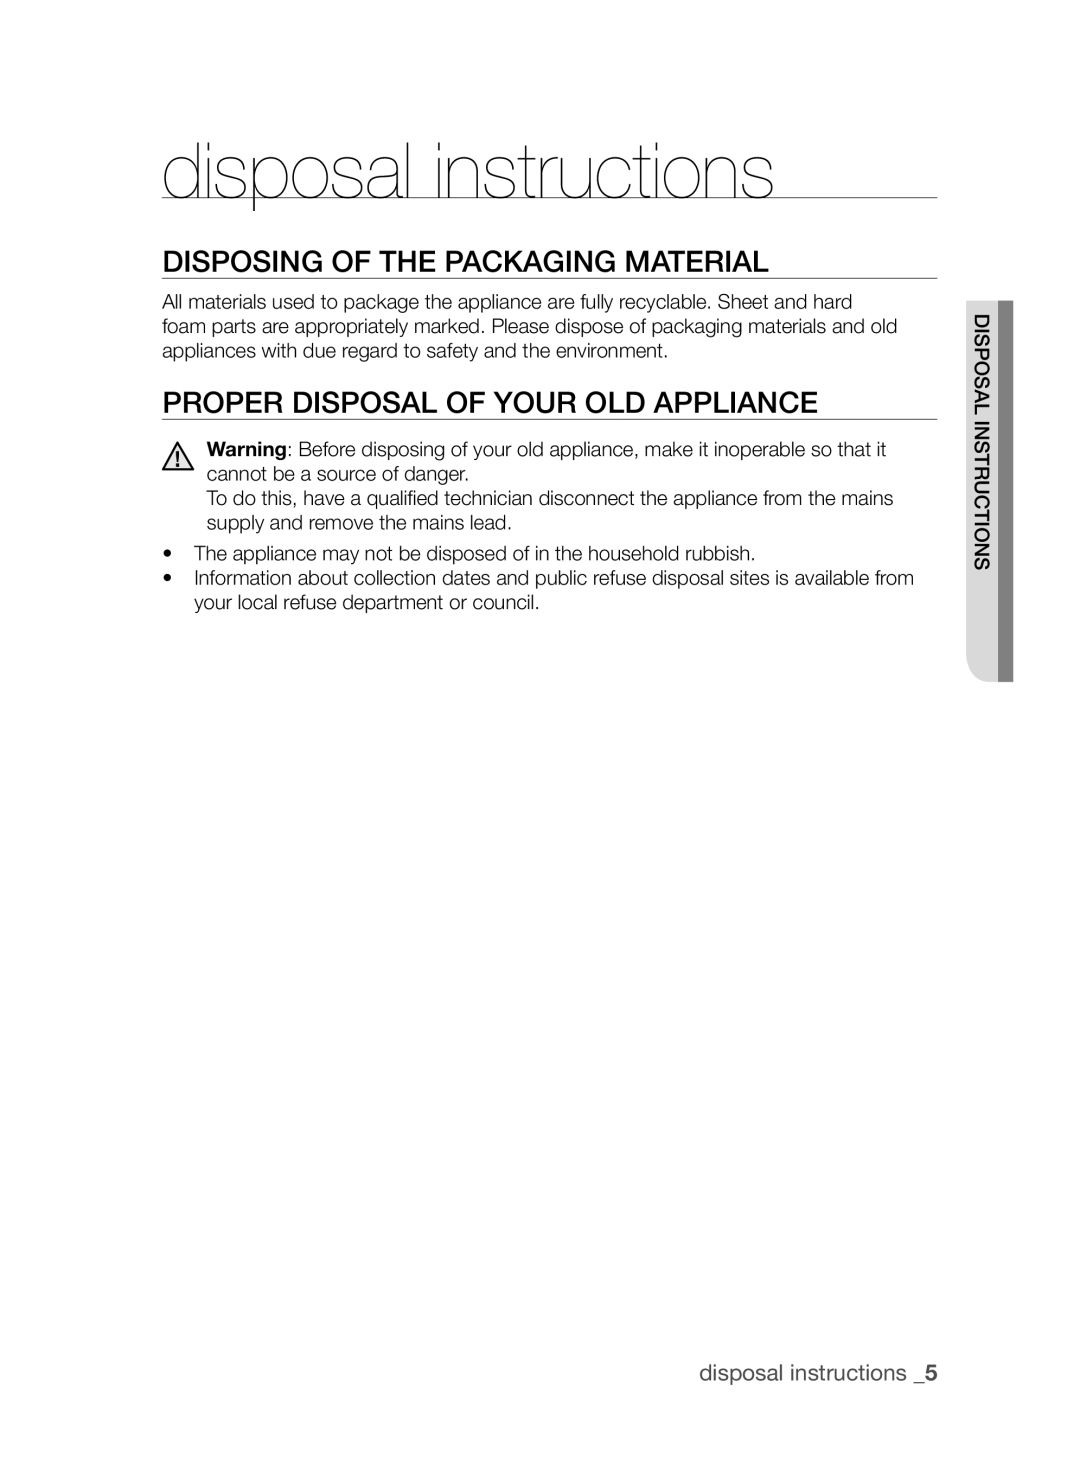 Samsung CTI613EH disposal instructions, Disposing of the packaging material, Proper disposal of your old appliance 